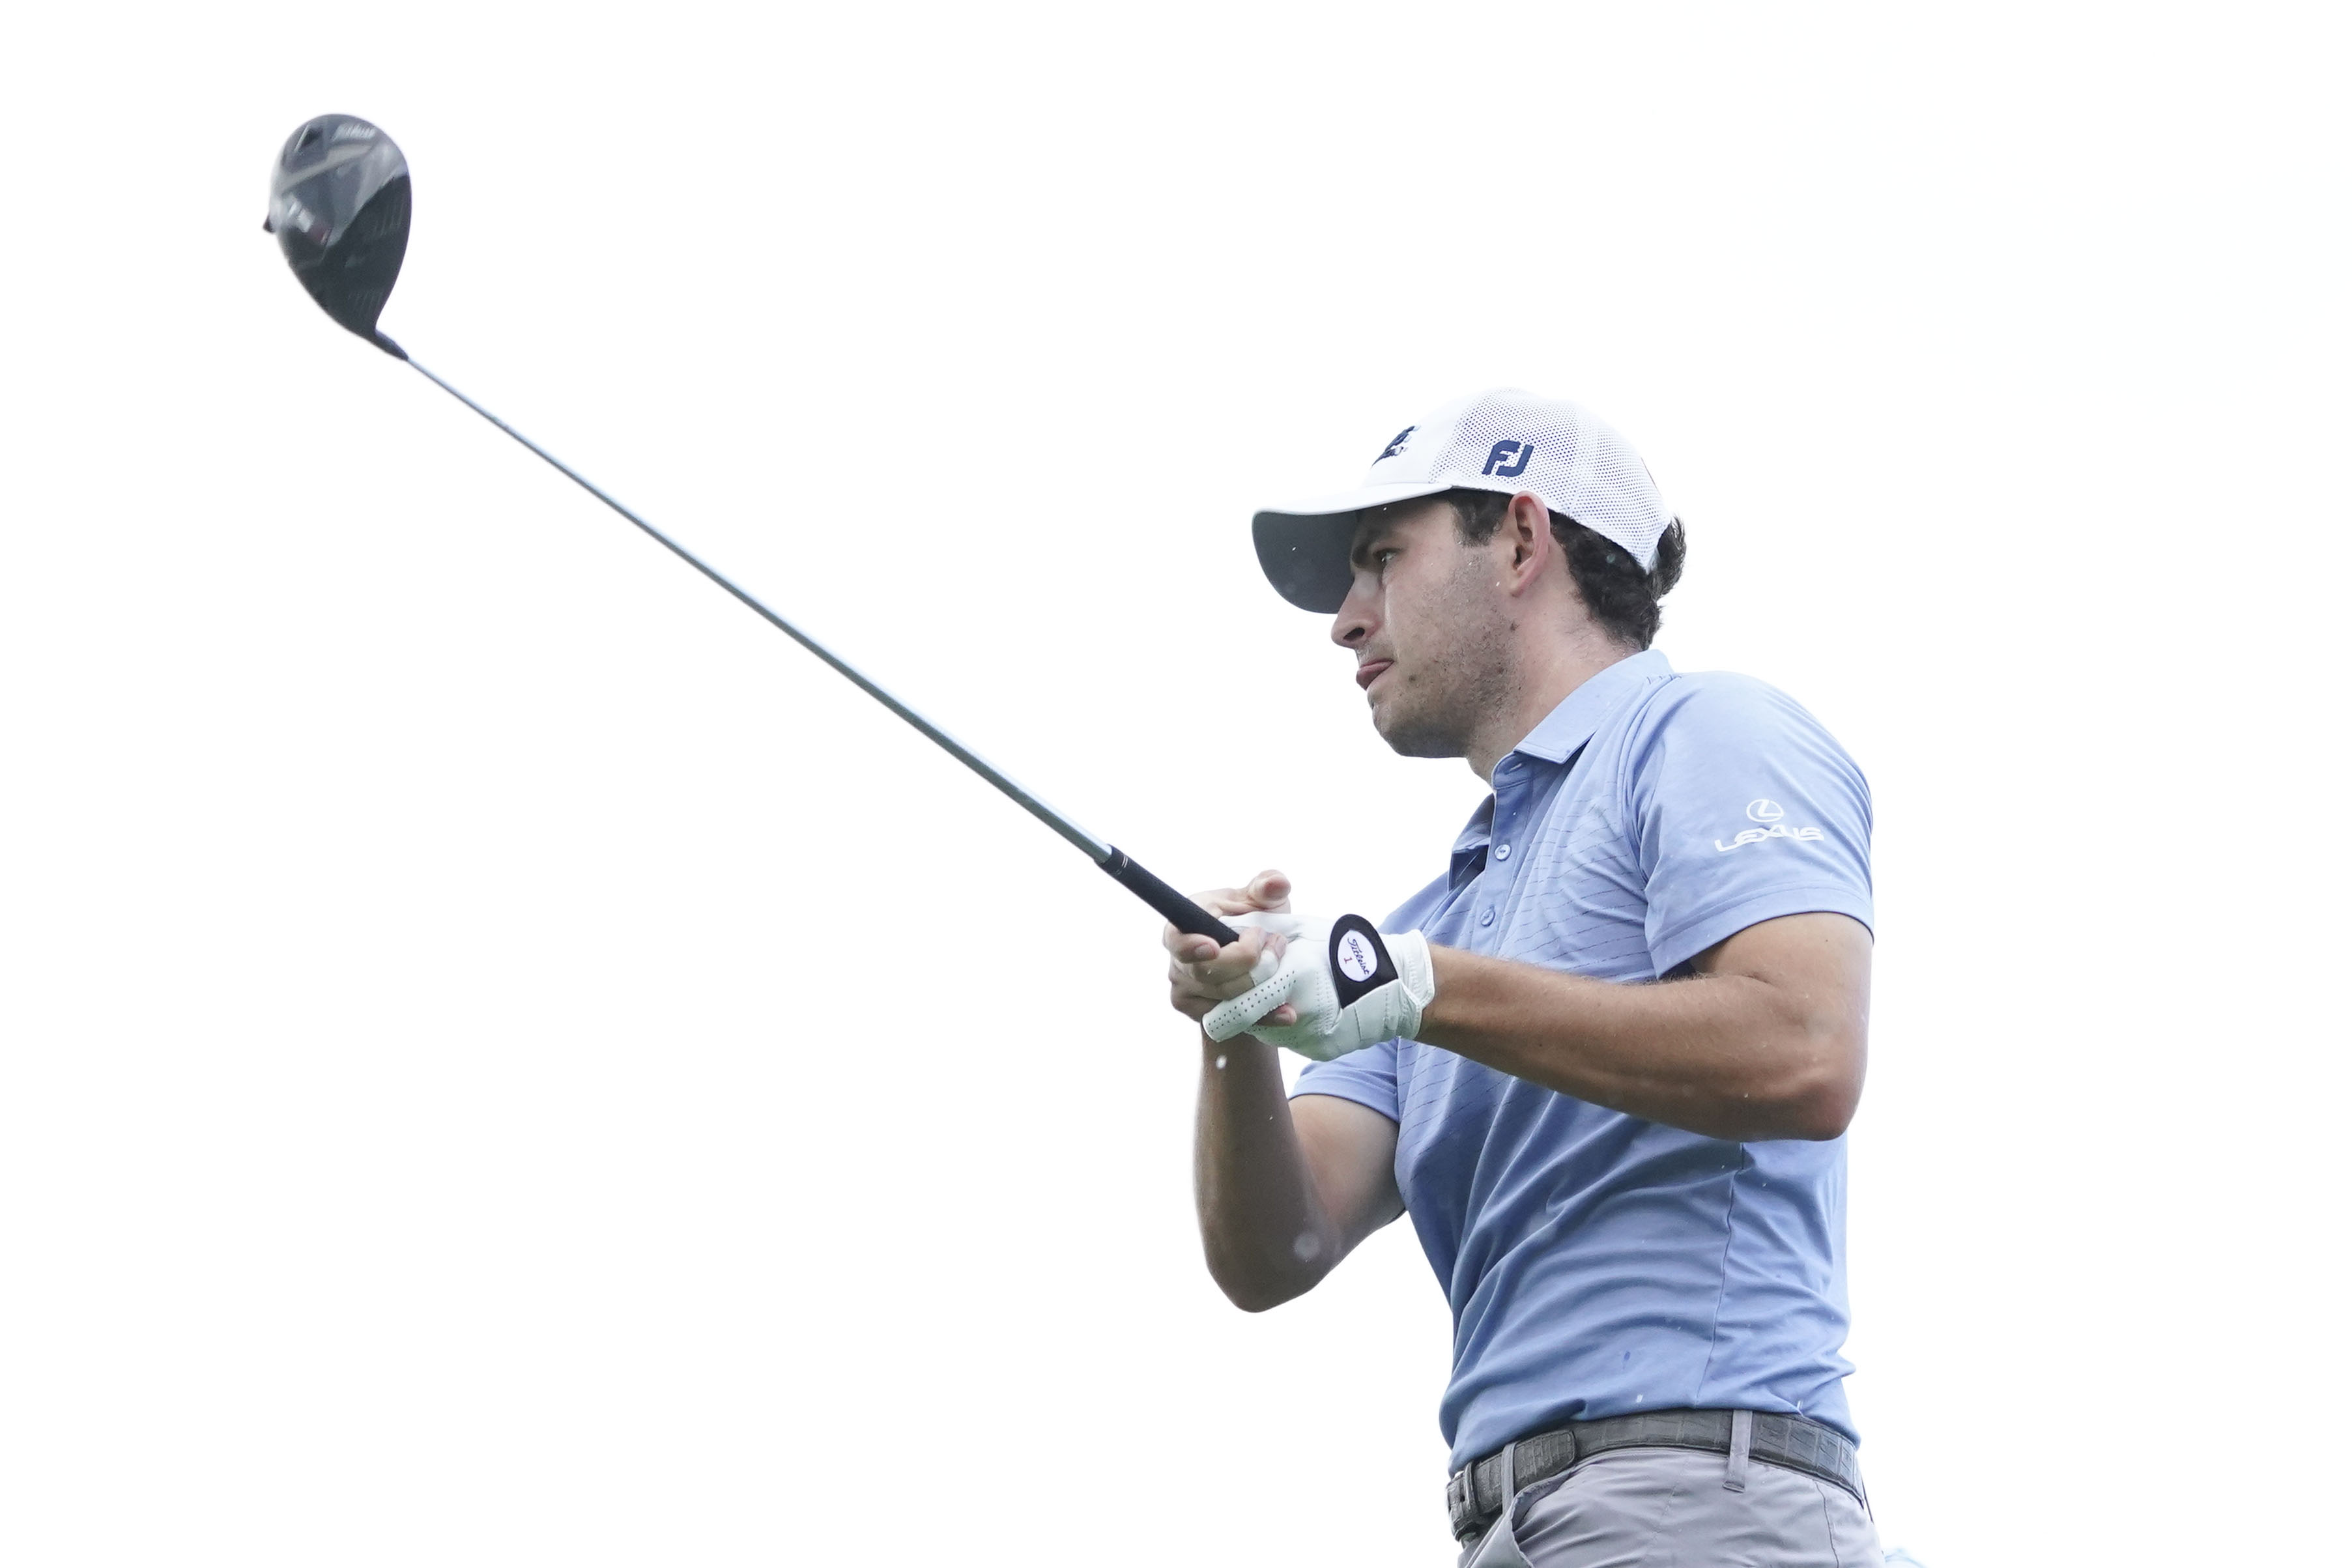 Patrick Cantlay drops F-BOMB in epic mic fail on PGA Tour